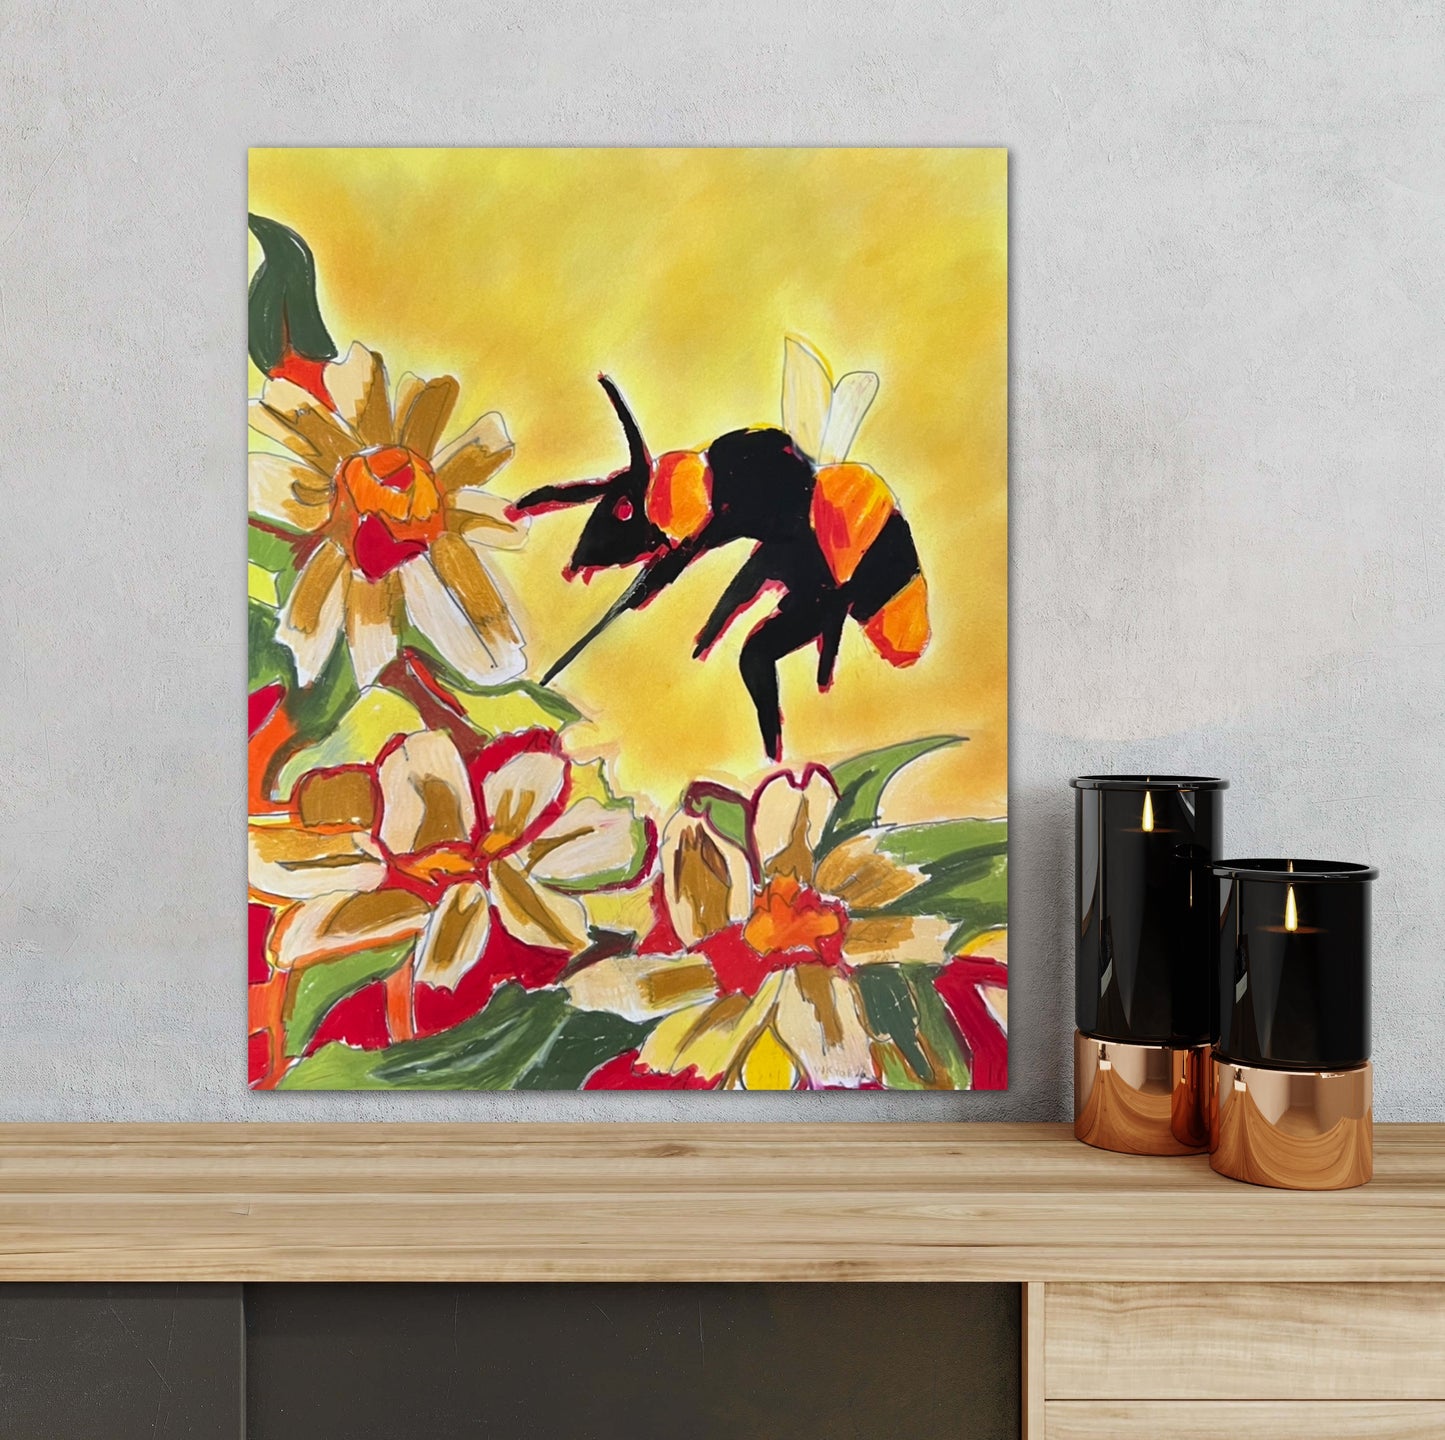 Sunflowers and The Bee - Stretched Canvas Print in more sizes